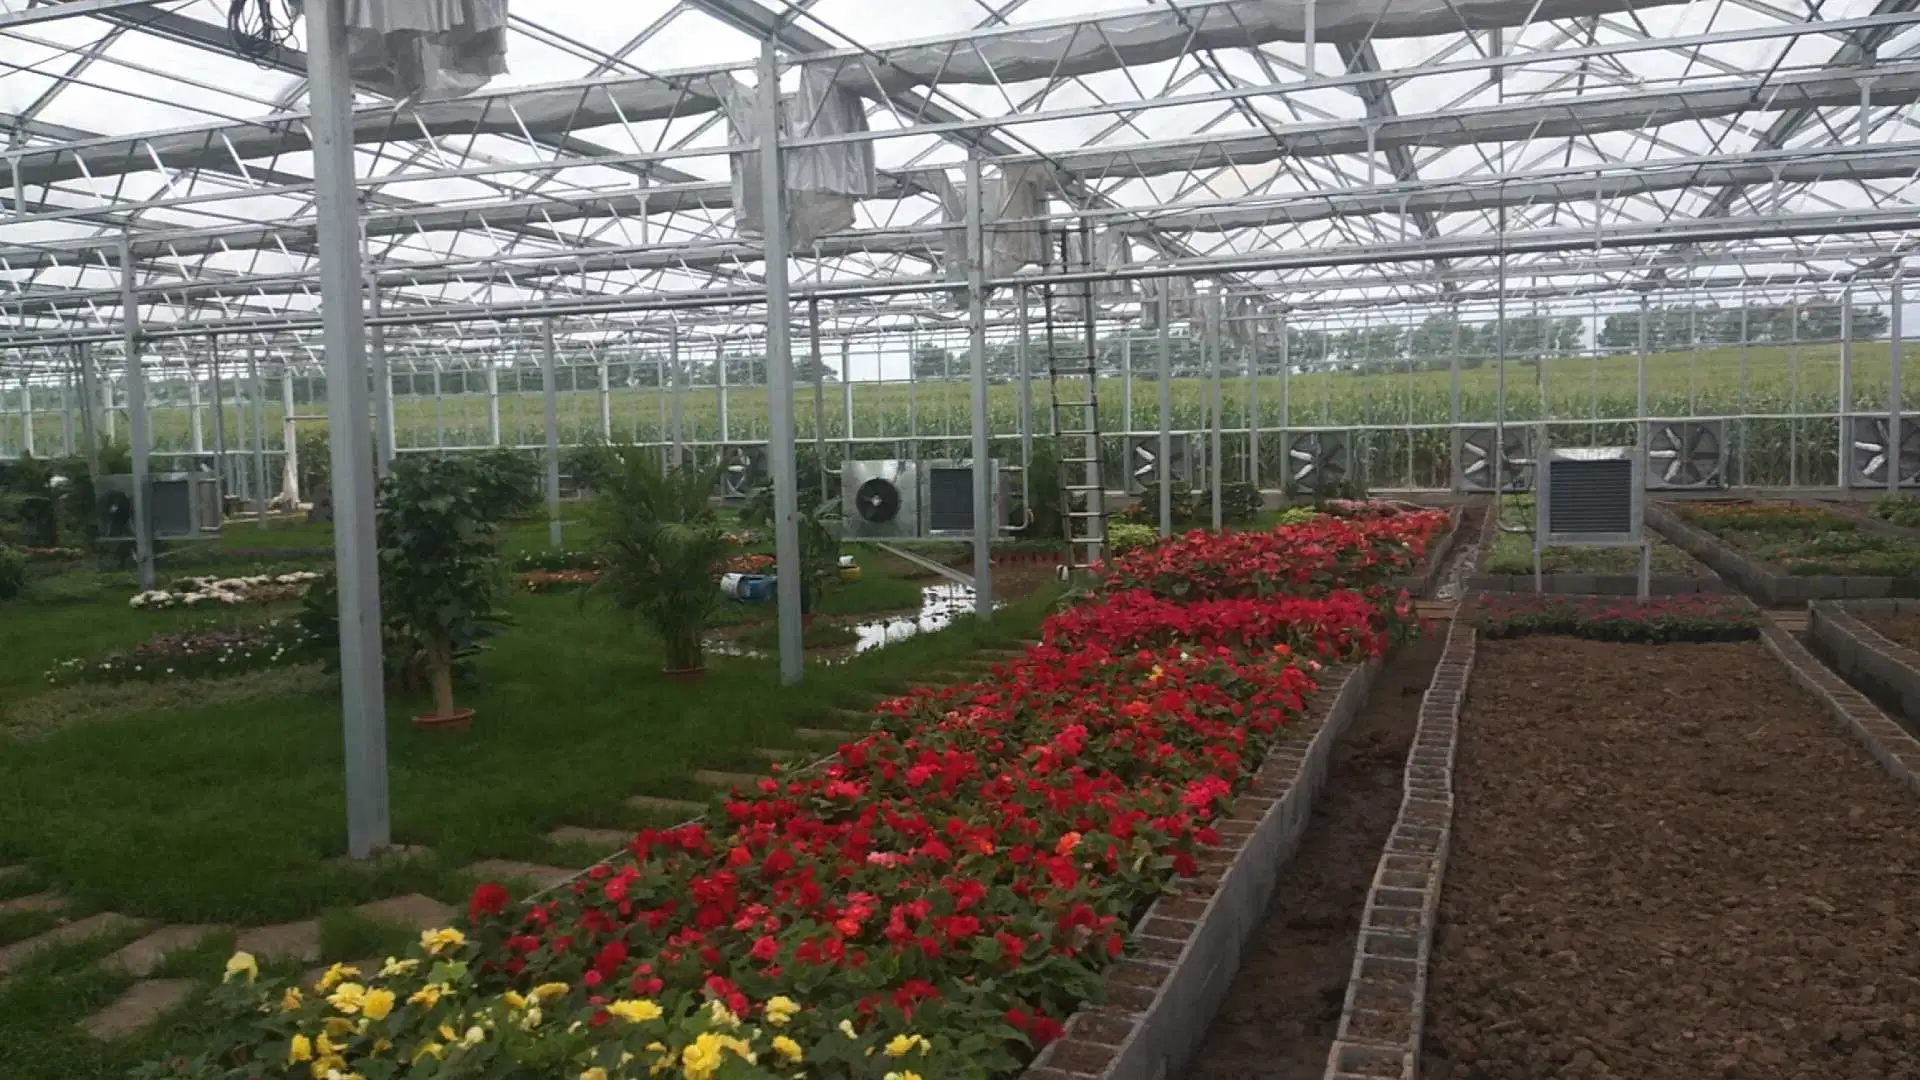 Smart Multi-Span Tunnel/Arch Type PE/Po Film Glass Agriculture/ Commercial Ecogical Greenhouse for Tomato/Cucumber/Strawberry with Hydroponics Growing System